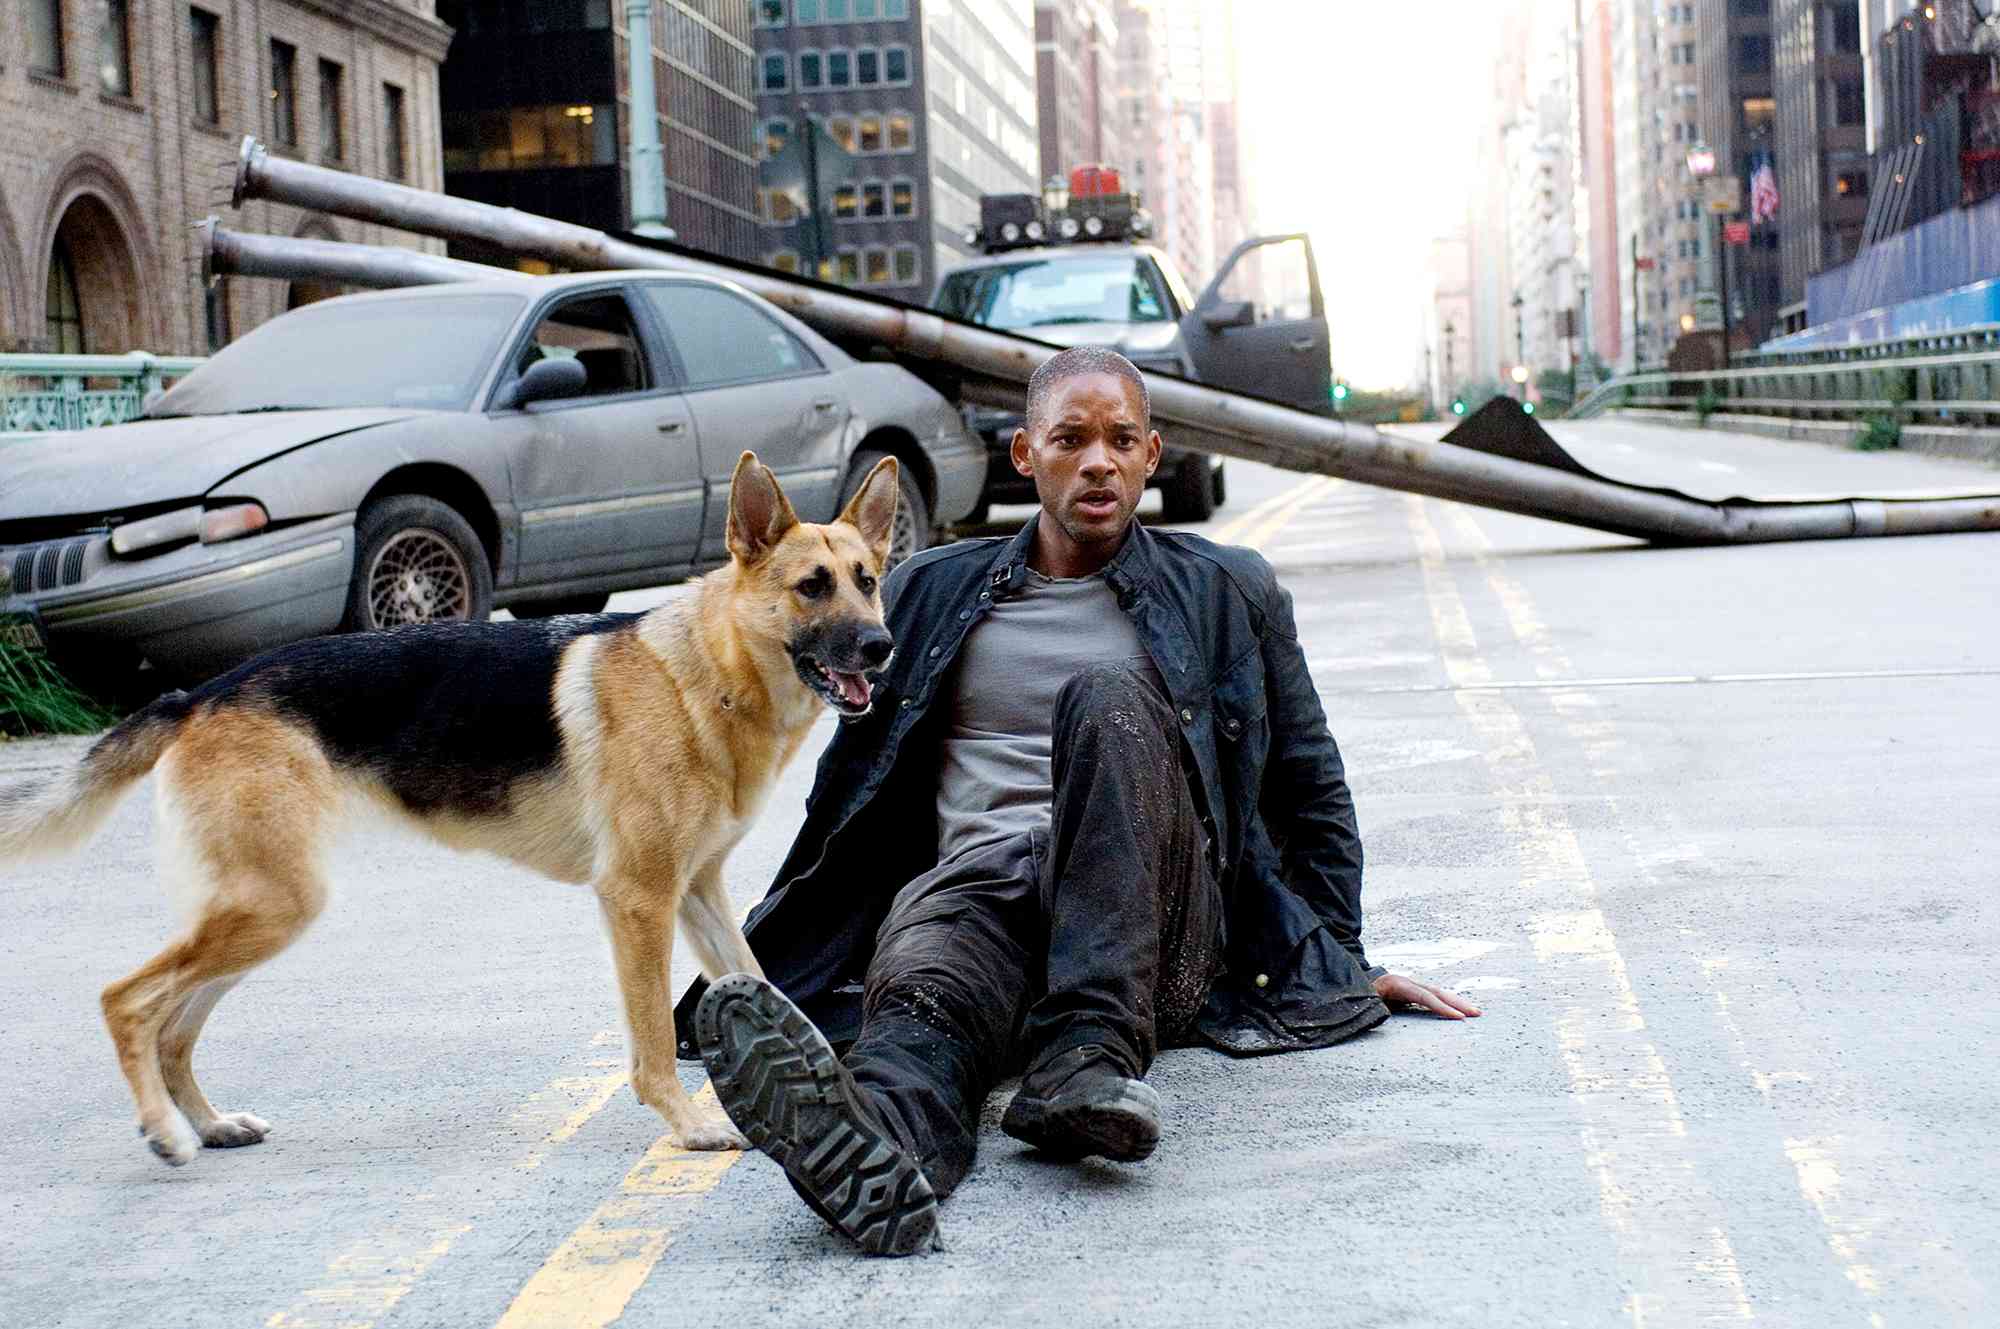 “I Am Legend 2”: Everything We Know About the Sequel to Will Smith's 2007 Post-Apocalyptic Film